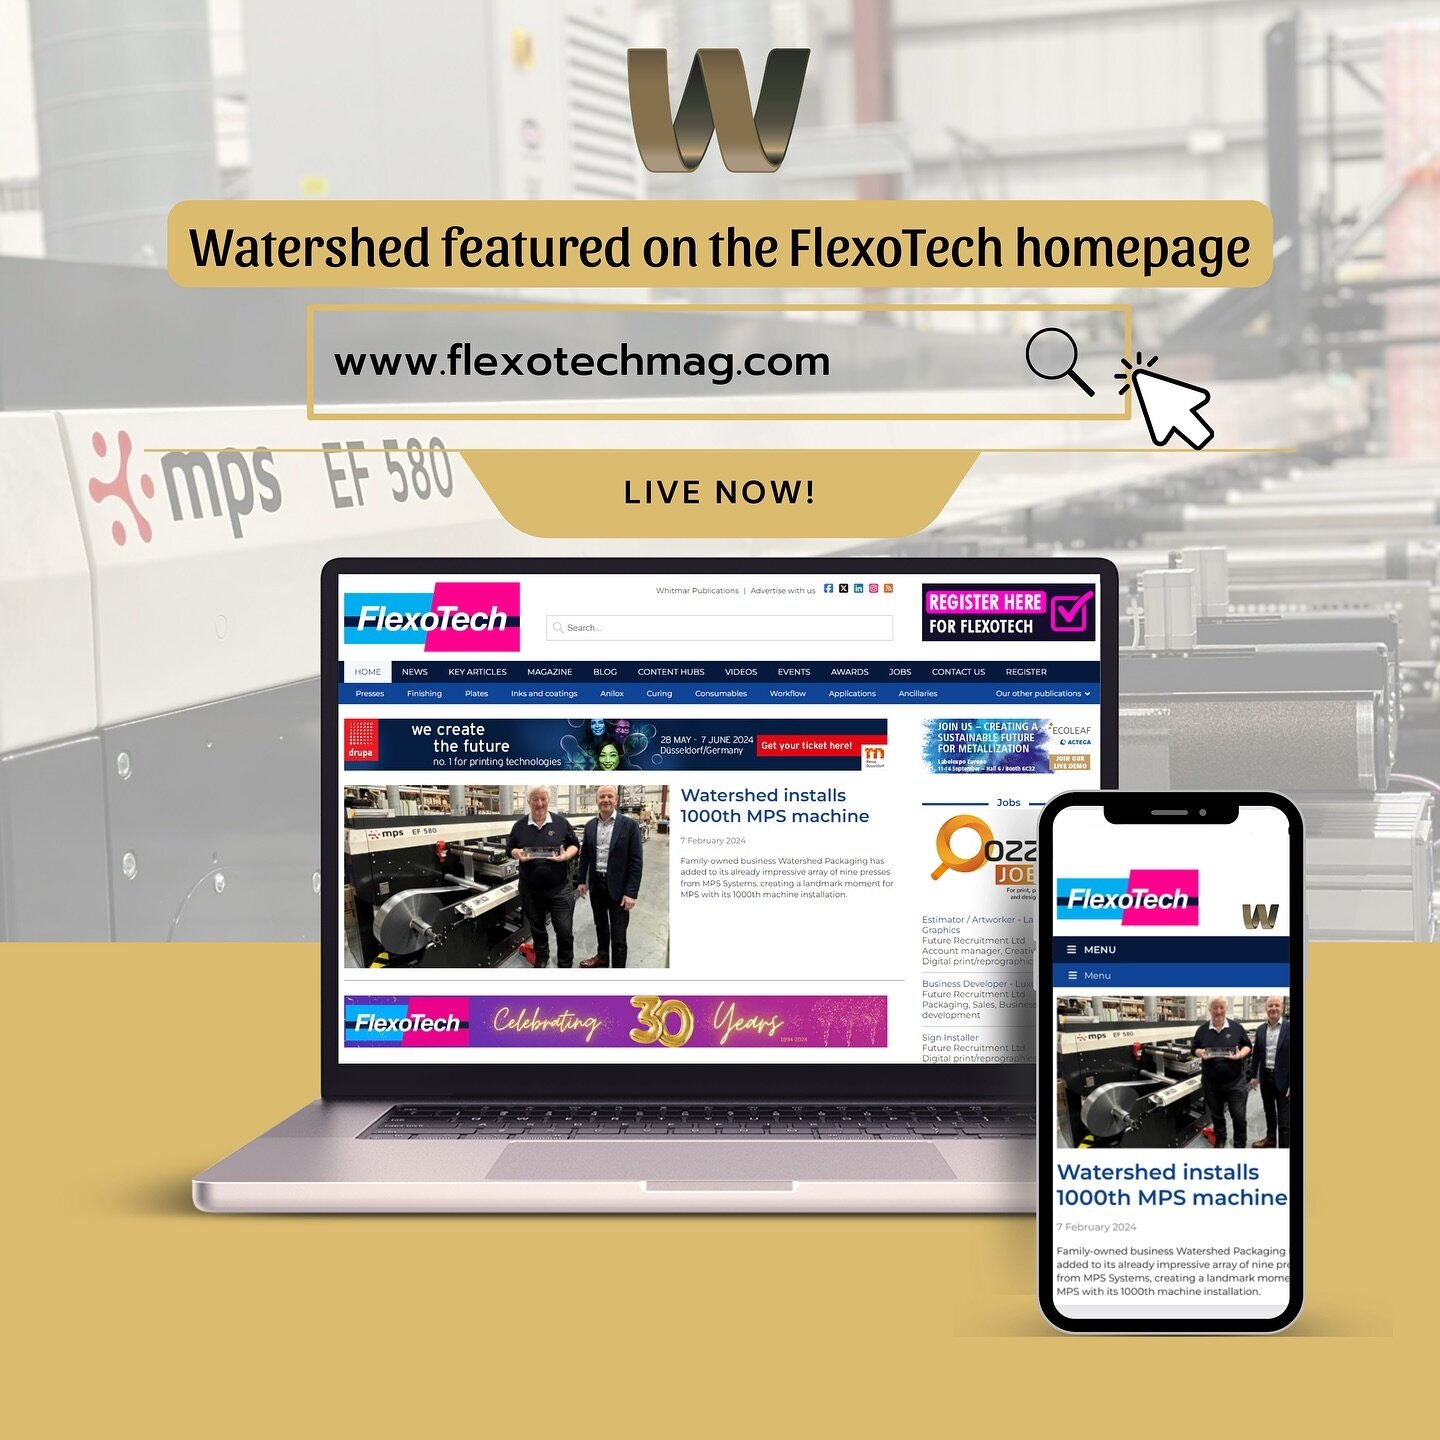 We are extremely excited to be featured on the home page of FlexoTech today discussing our relationship with @mpssystems and their 1000th machine installation newly commissioned at our headquarters in Leeds!

#flexotech #website #homepage #printing #